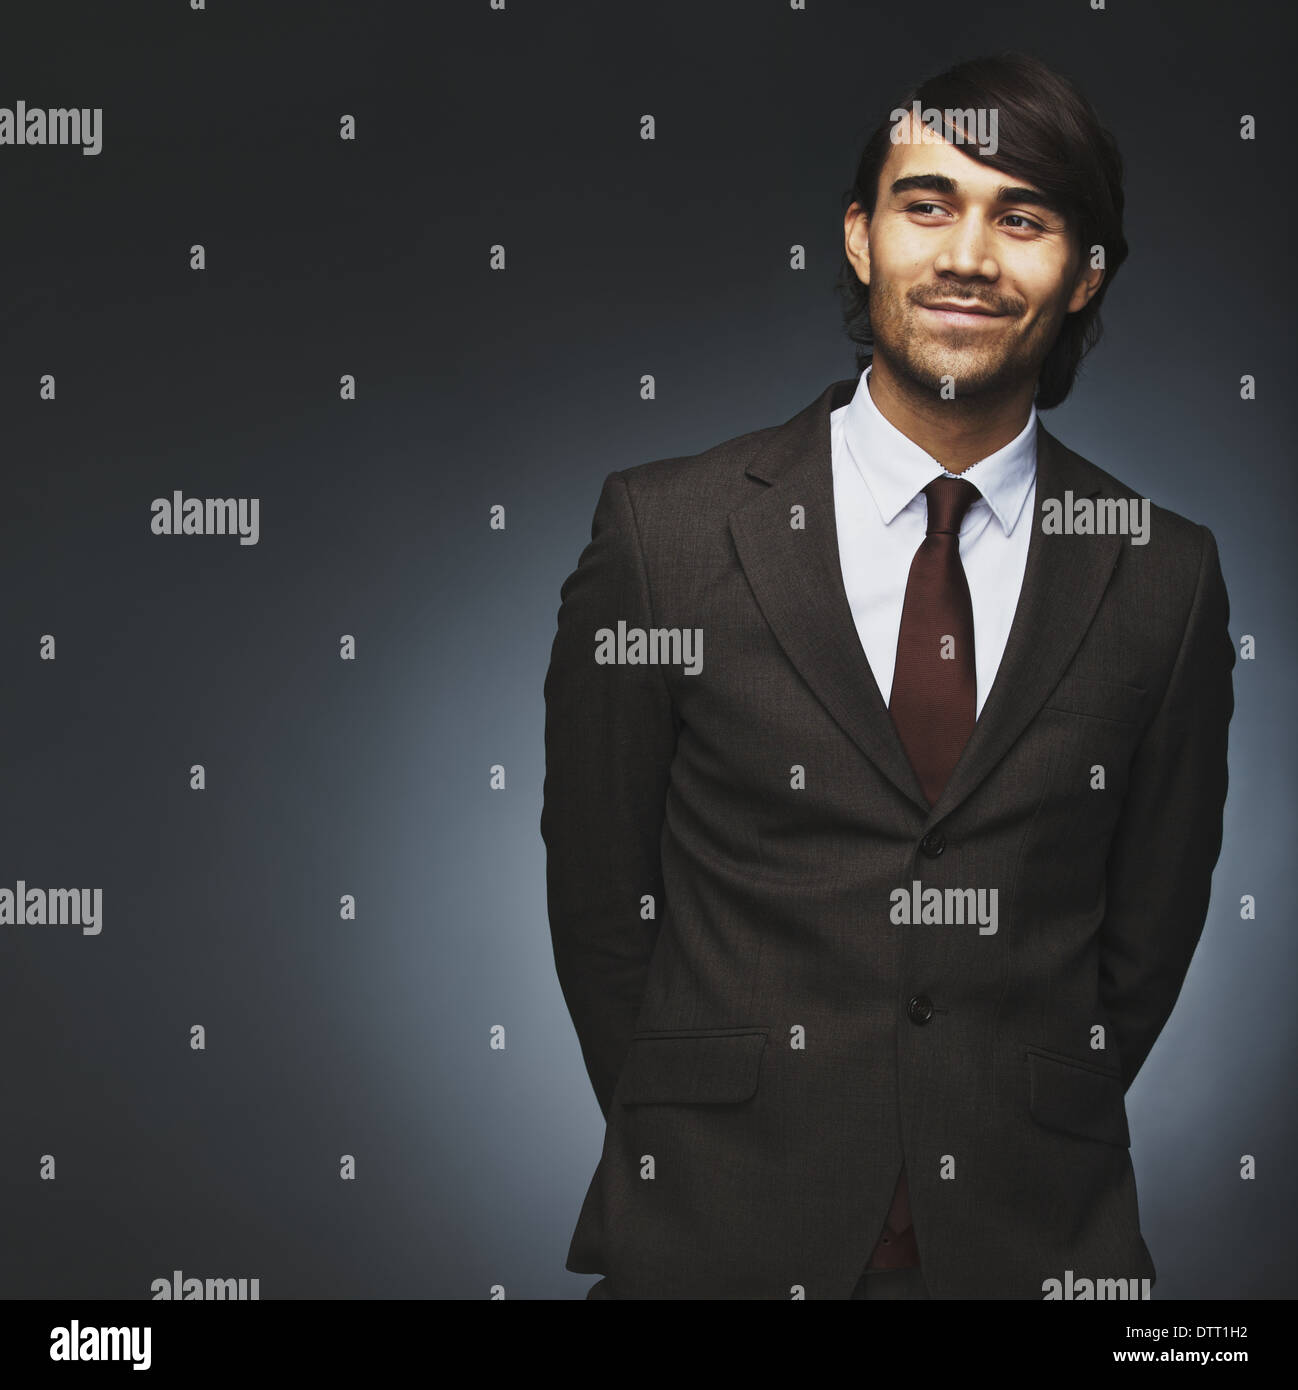 Handsome young man looking away smiling on black background. Male model in business suit looking at copyspace. Stock Photo